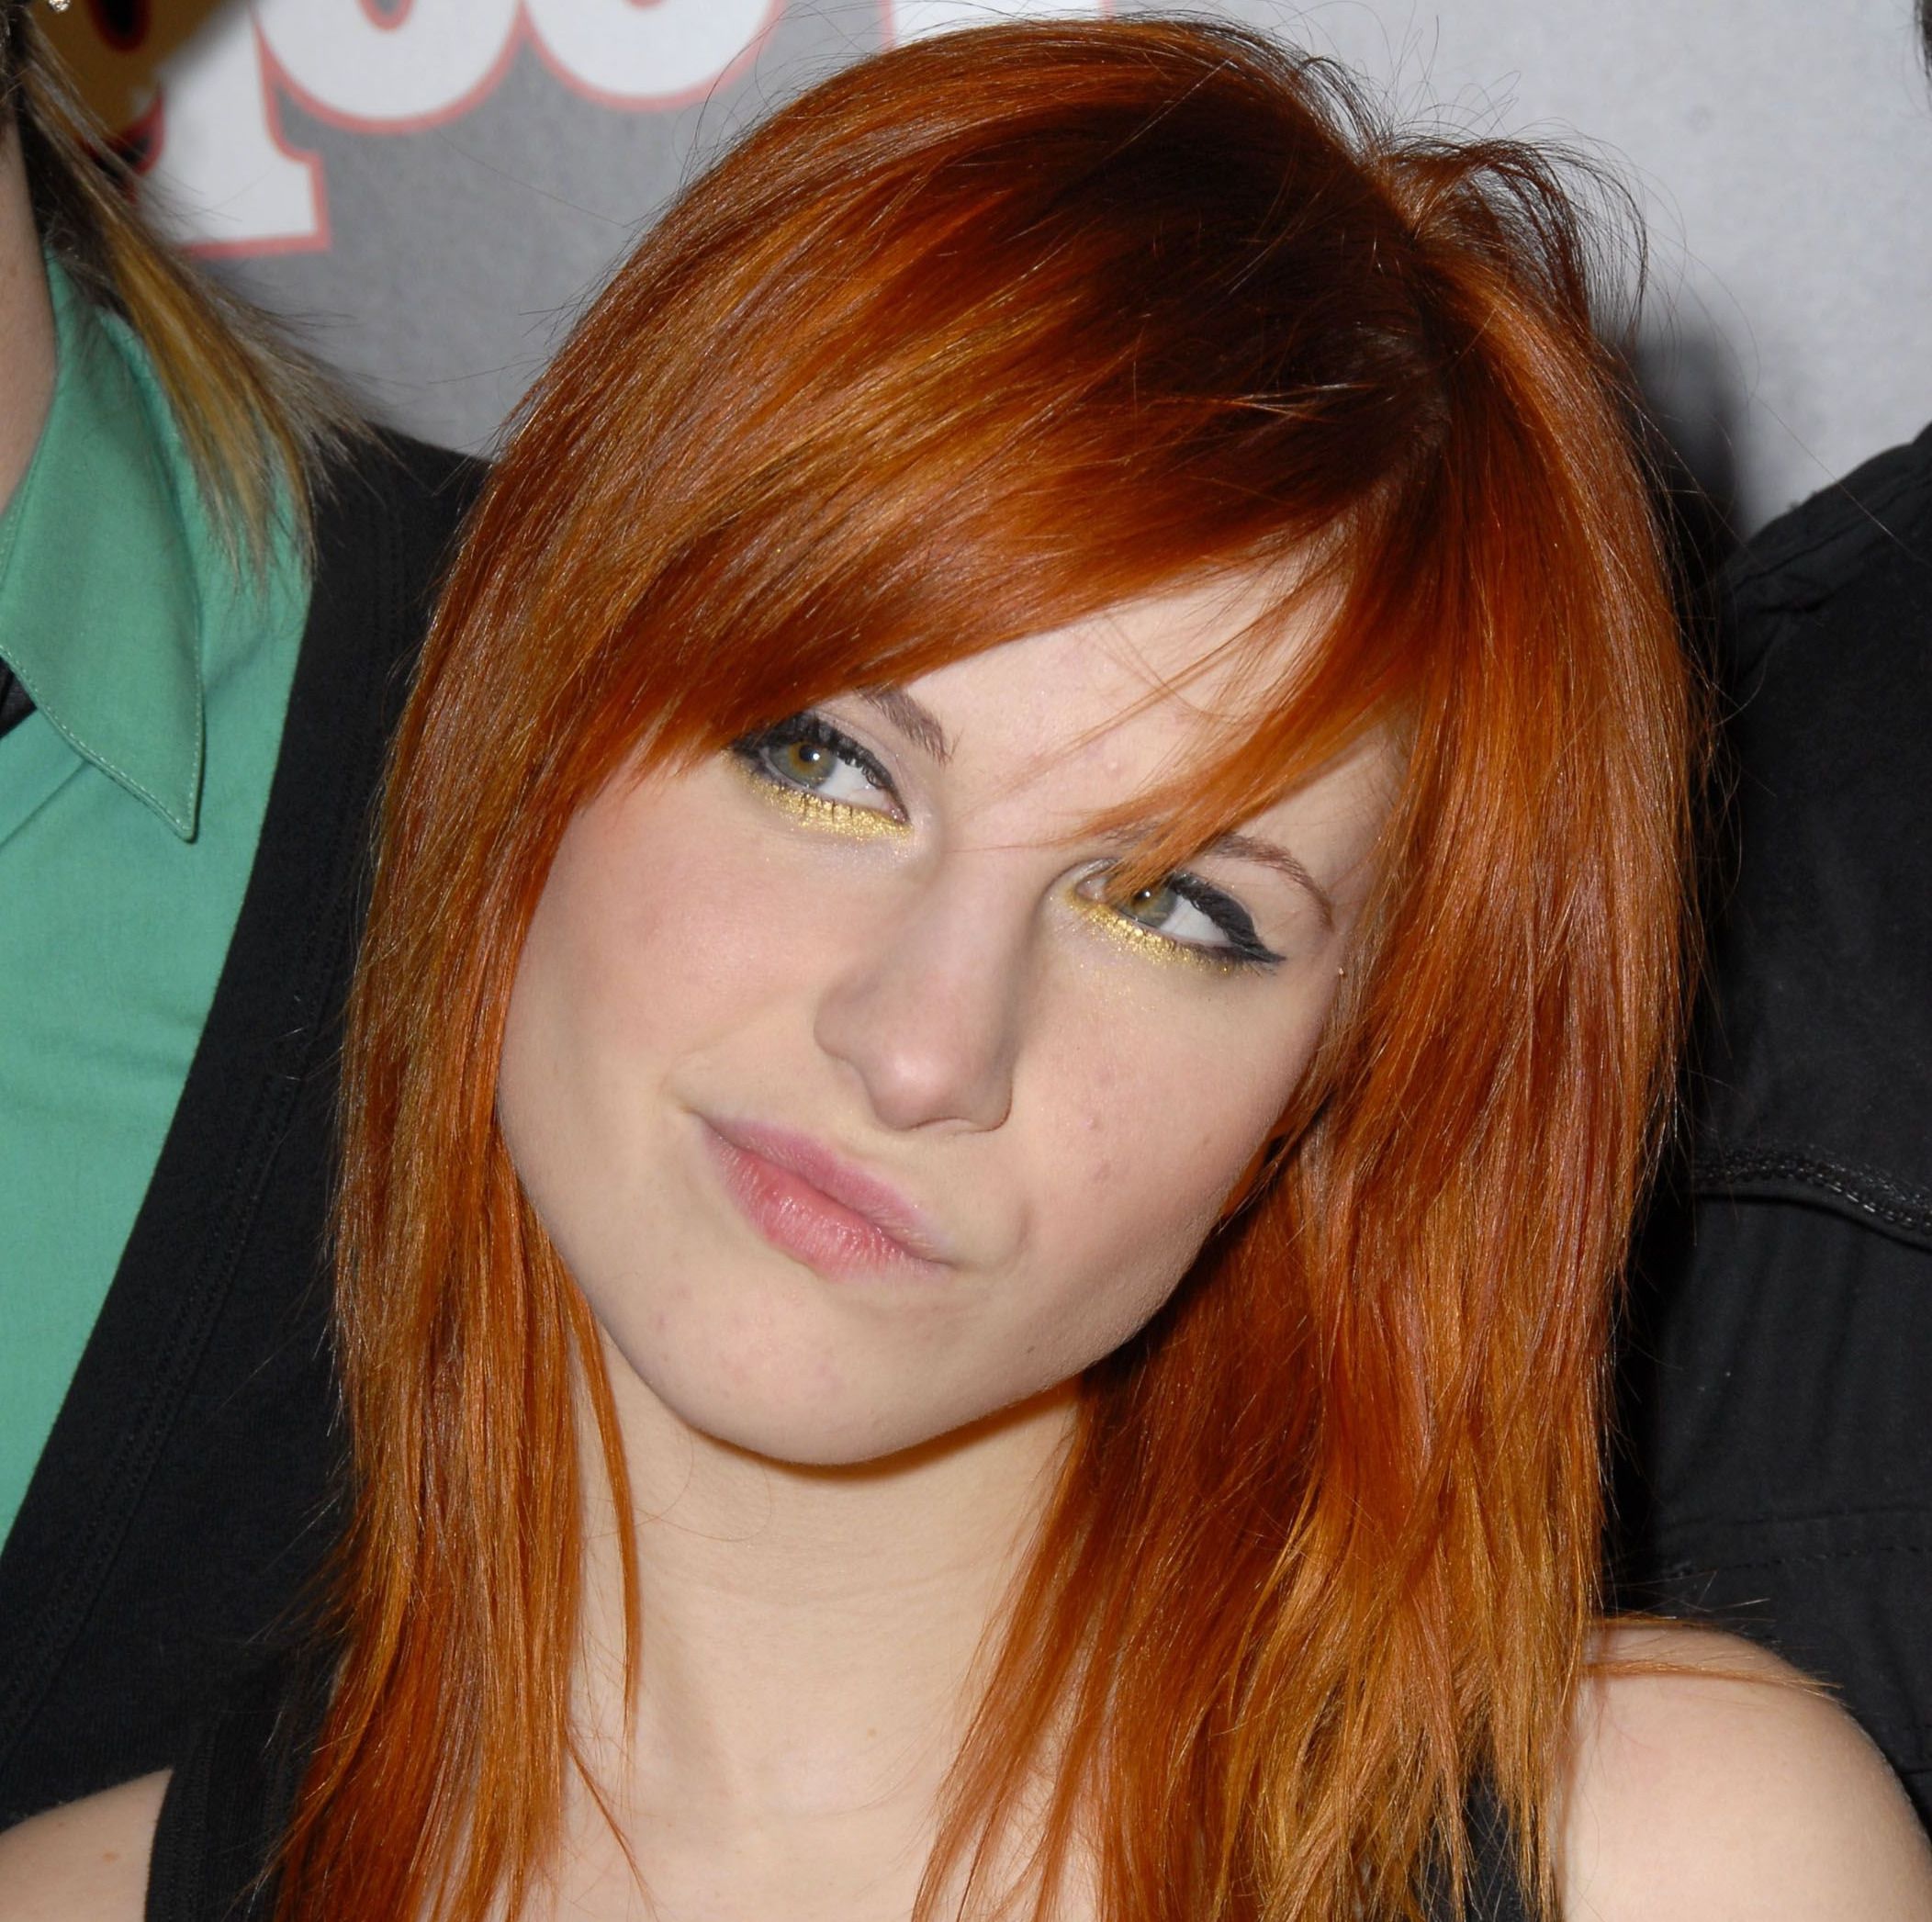 General photo of Hayley Williams